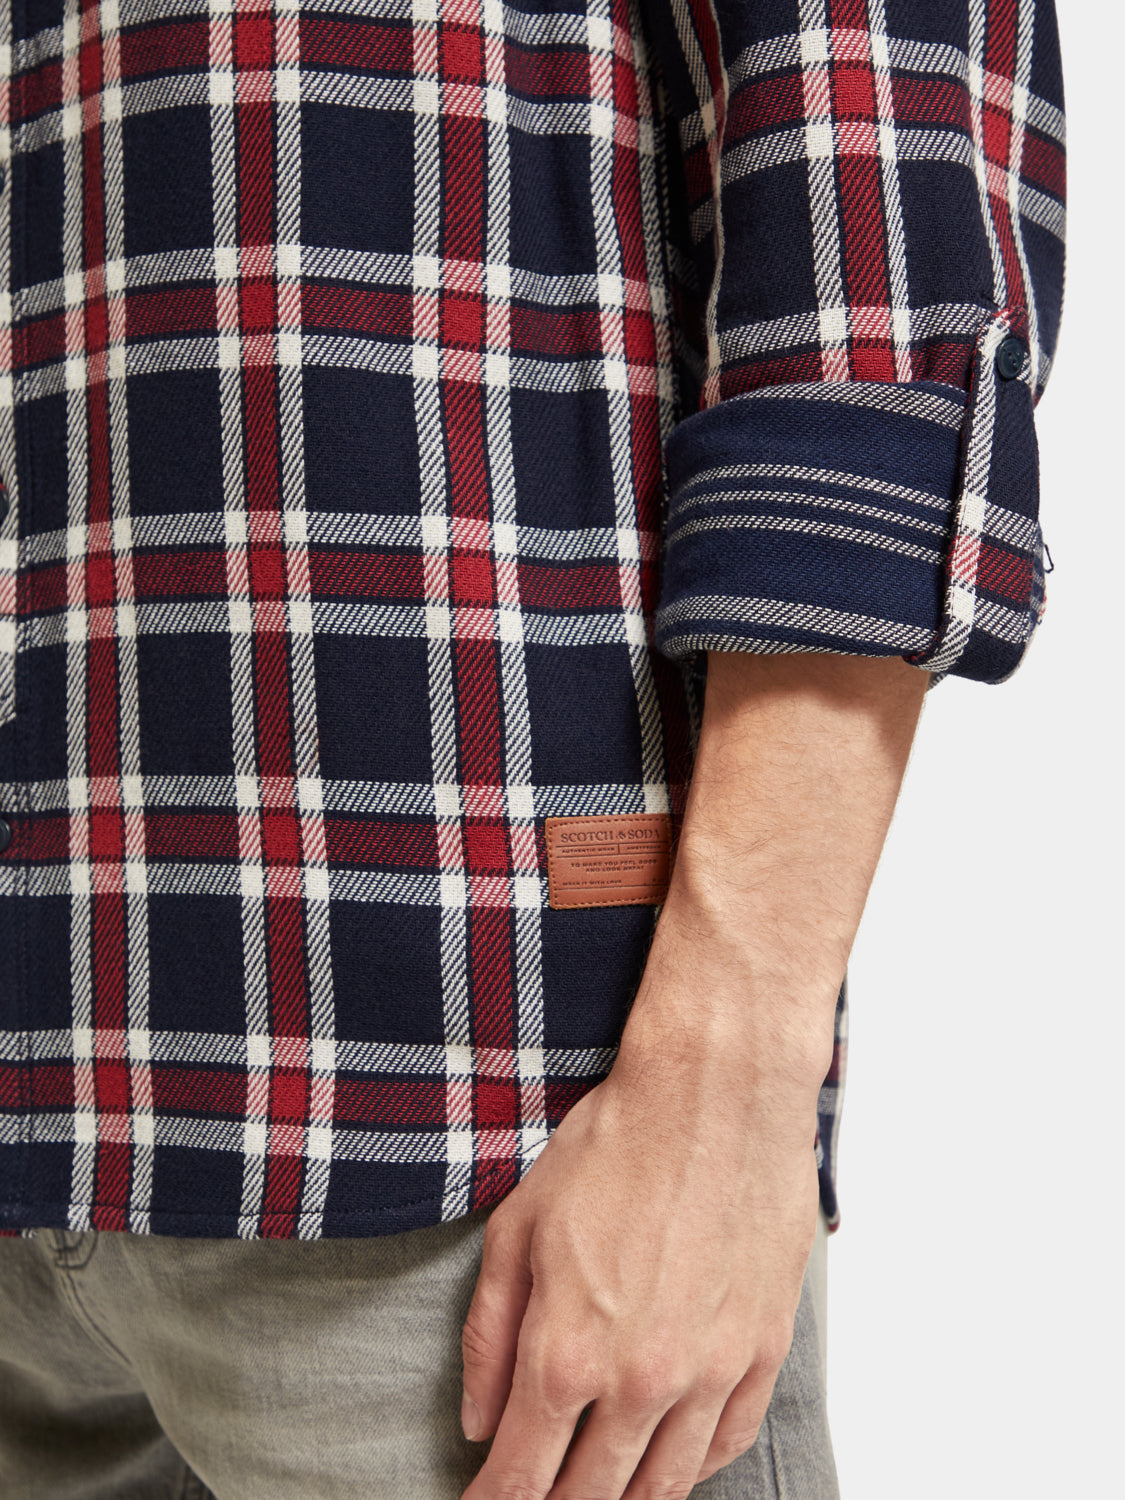 Double-faced twill check shirt - Red Blue Check